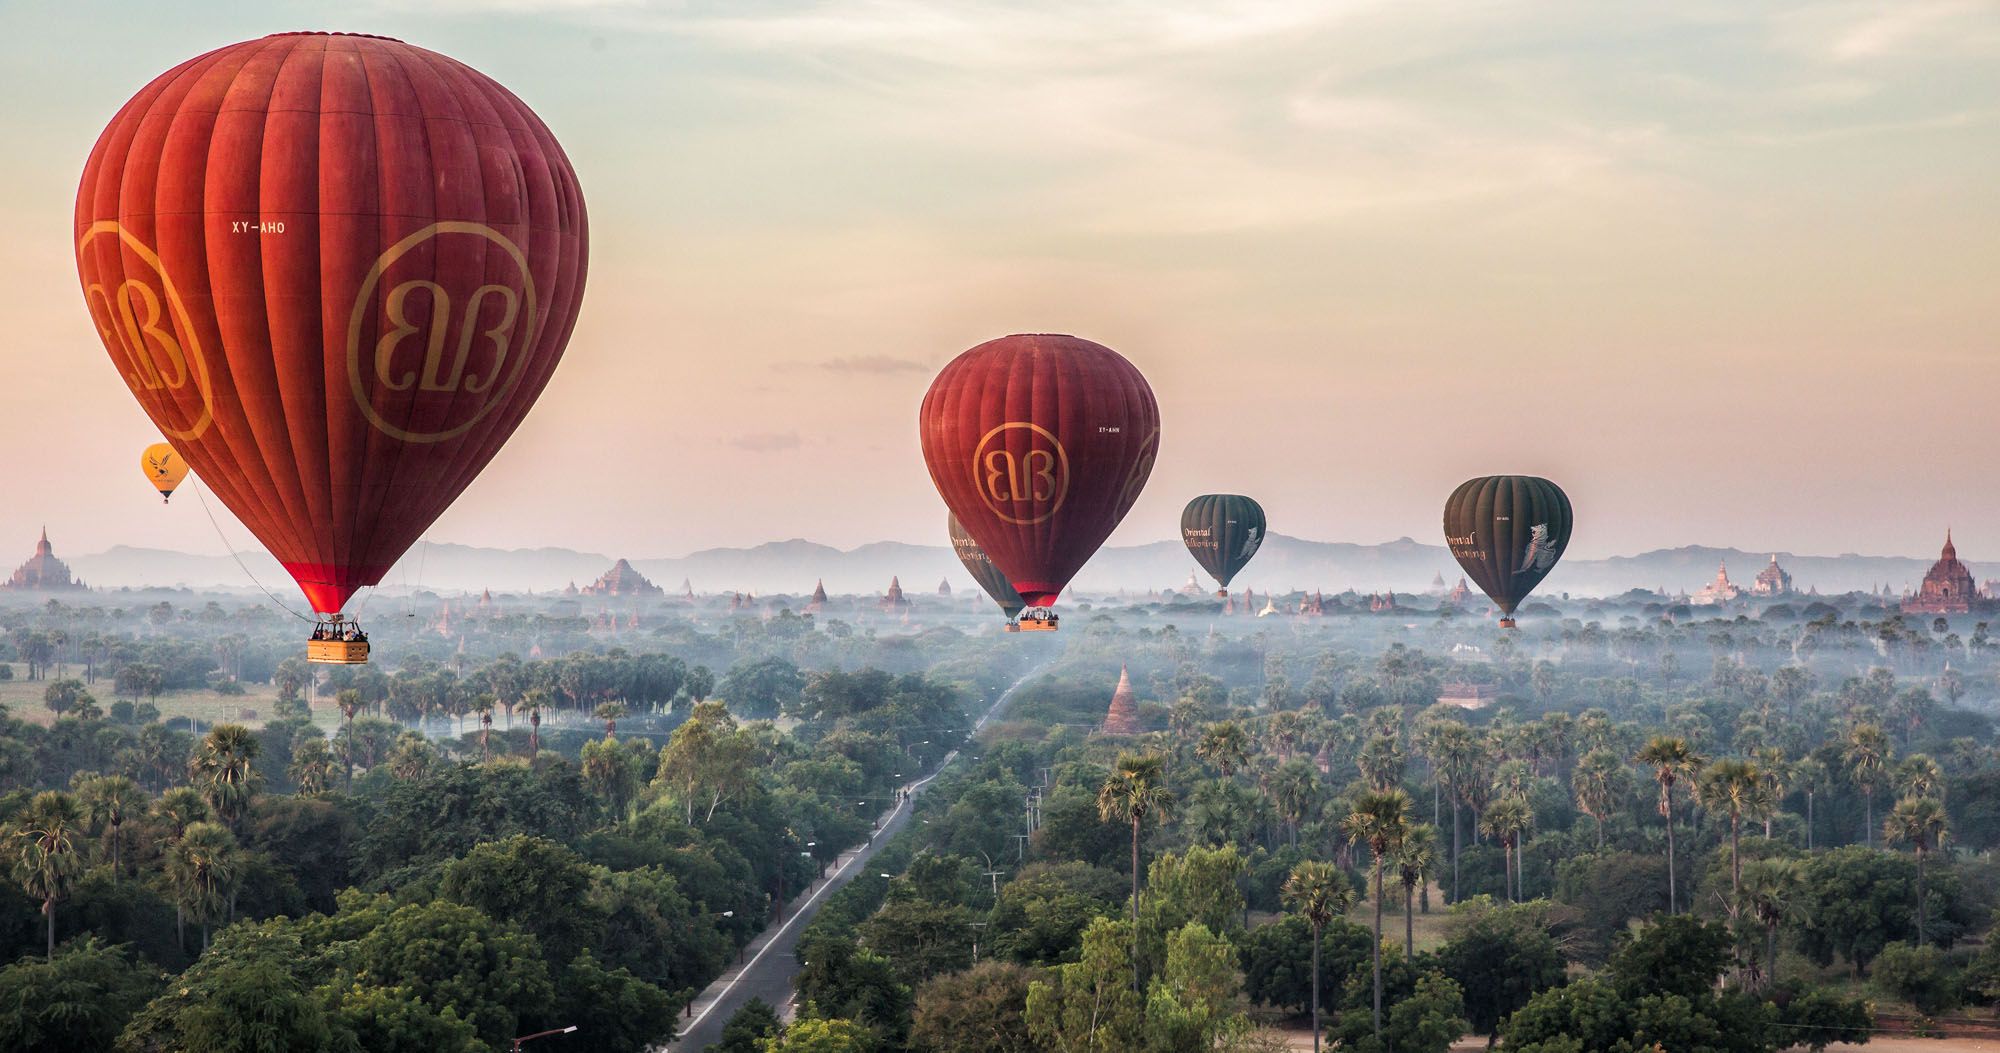 Featured image for “A Hot Air Balloon Ride Over Bagan, Myanmar”